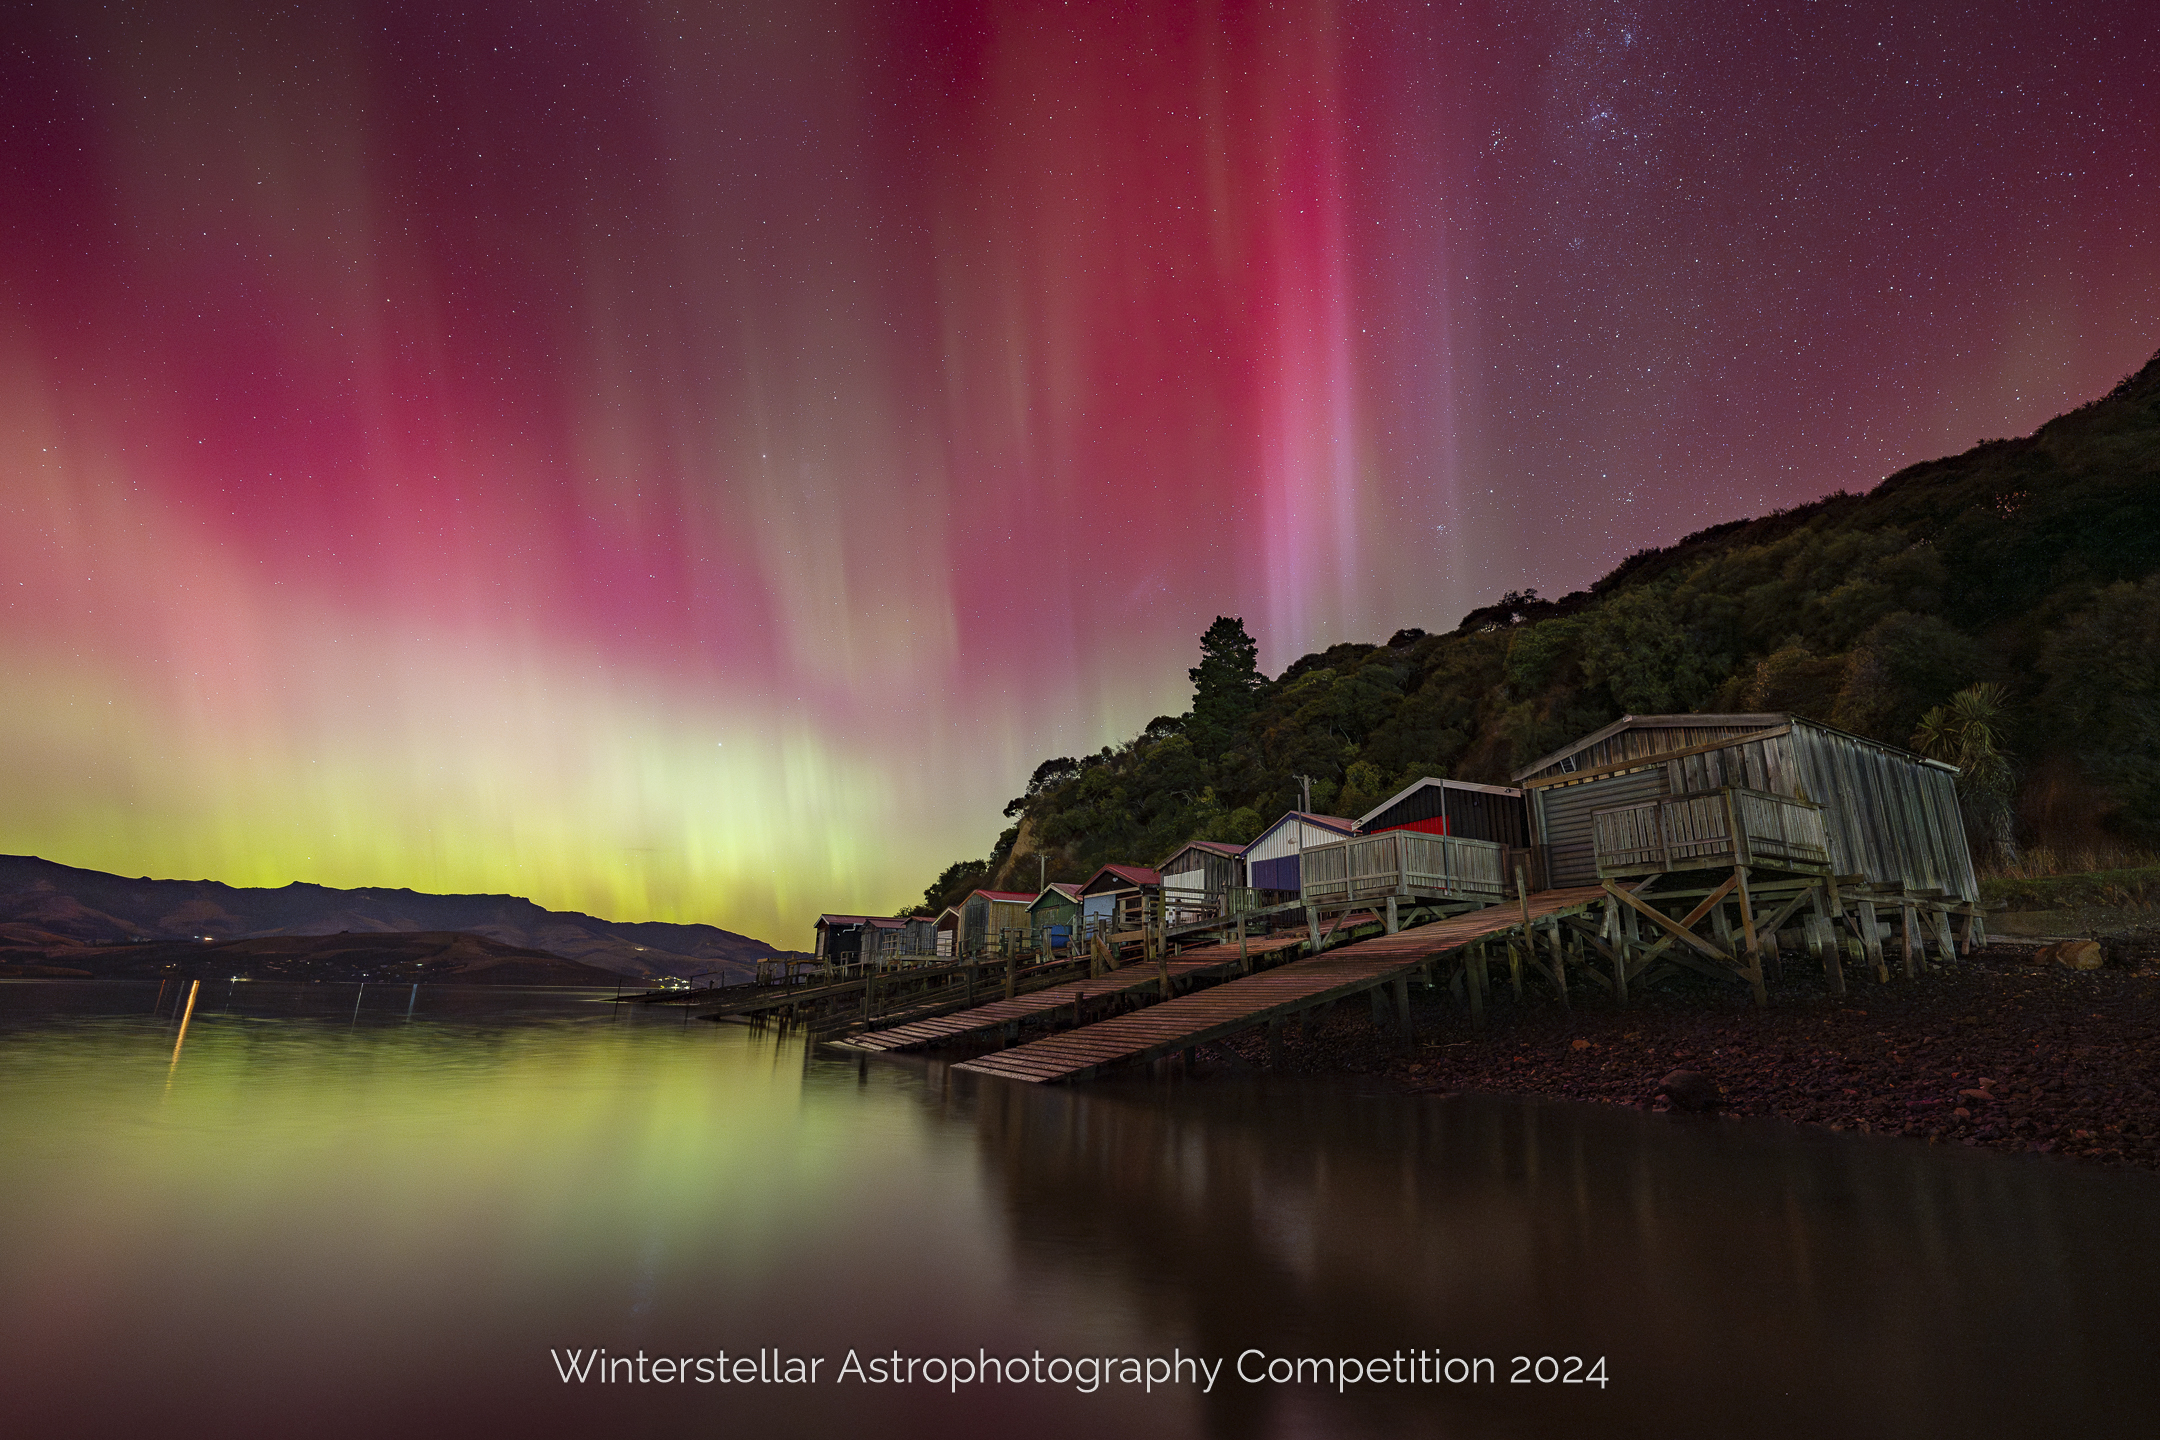 Stunning Aurora fills sky behind boat houses and water in foreground.